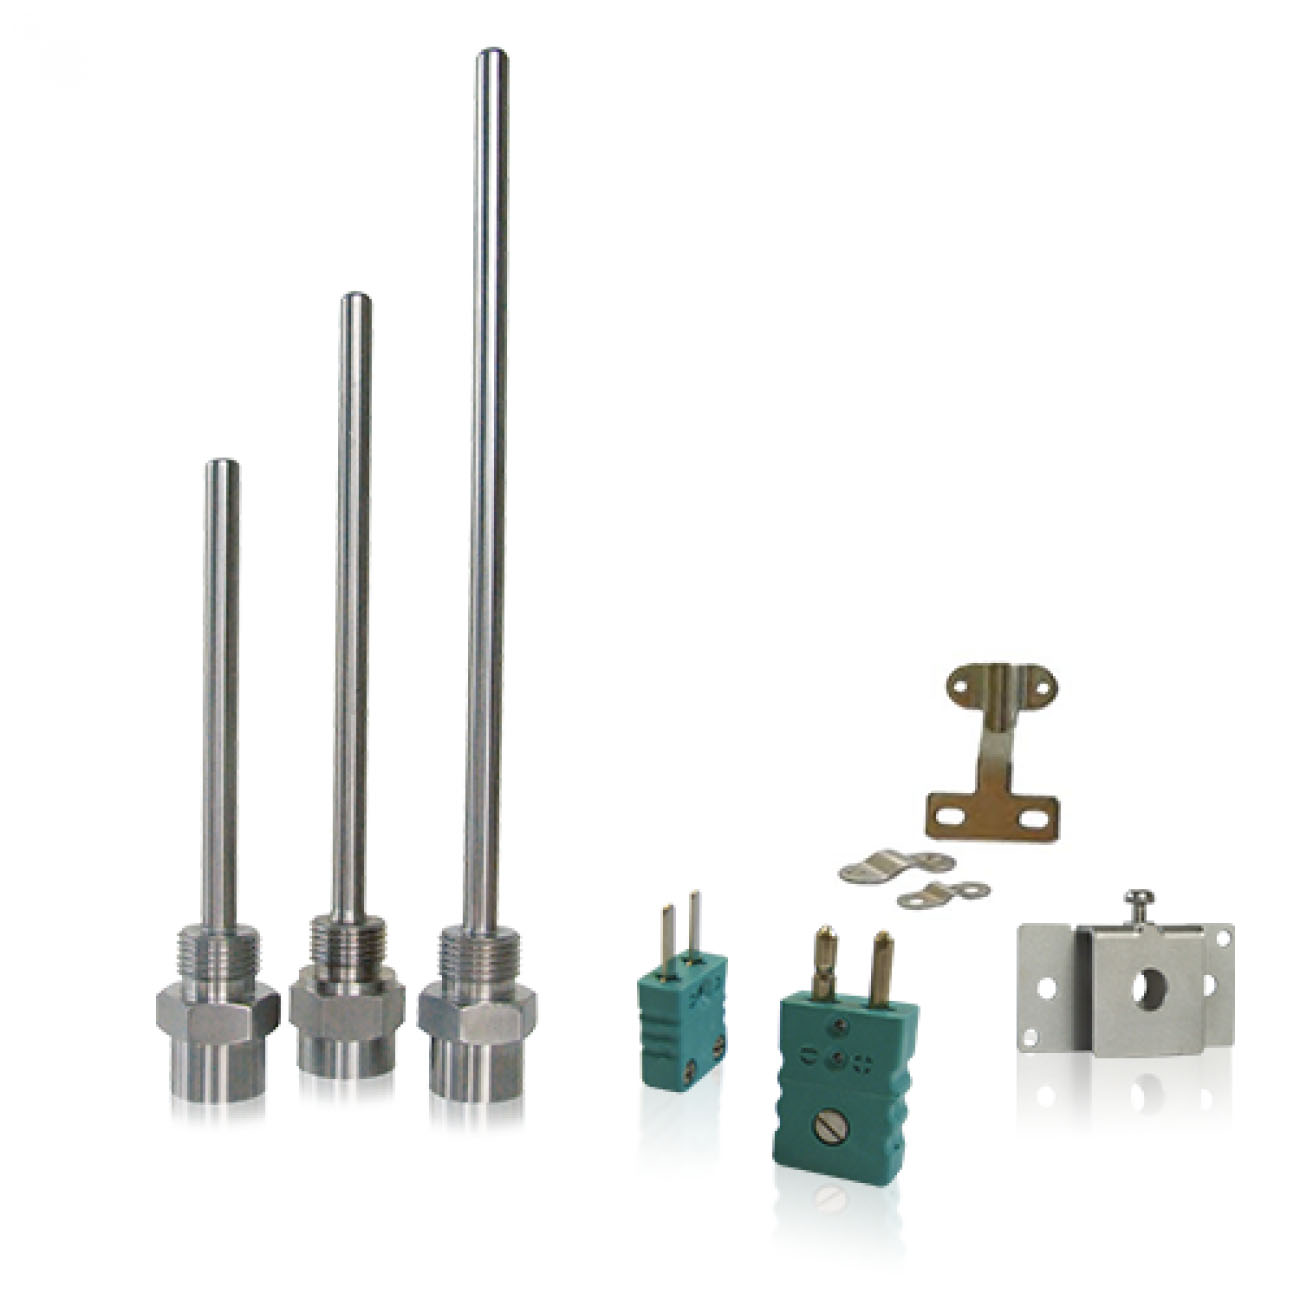 Accessories for autonomous Pt100 and Thermocouple temperature probes